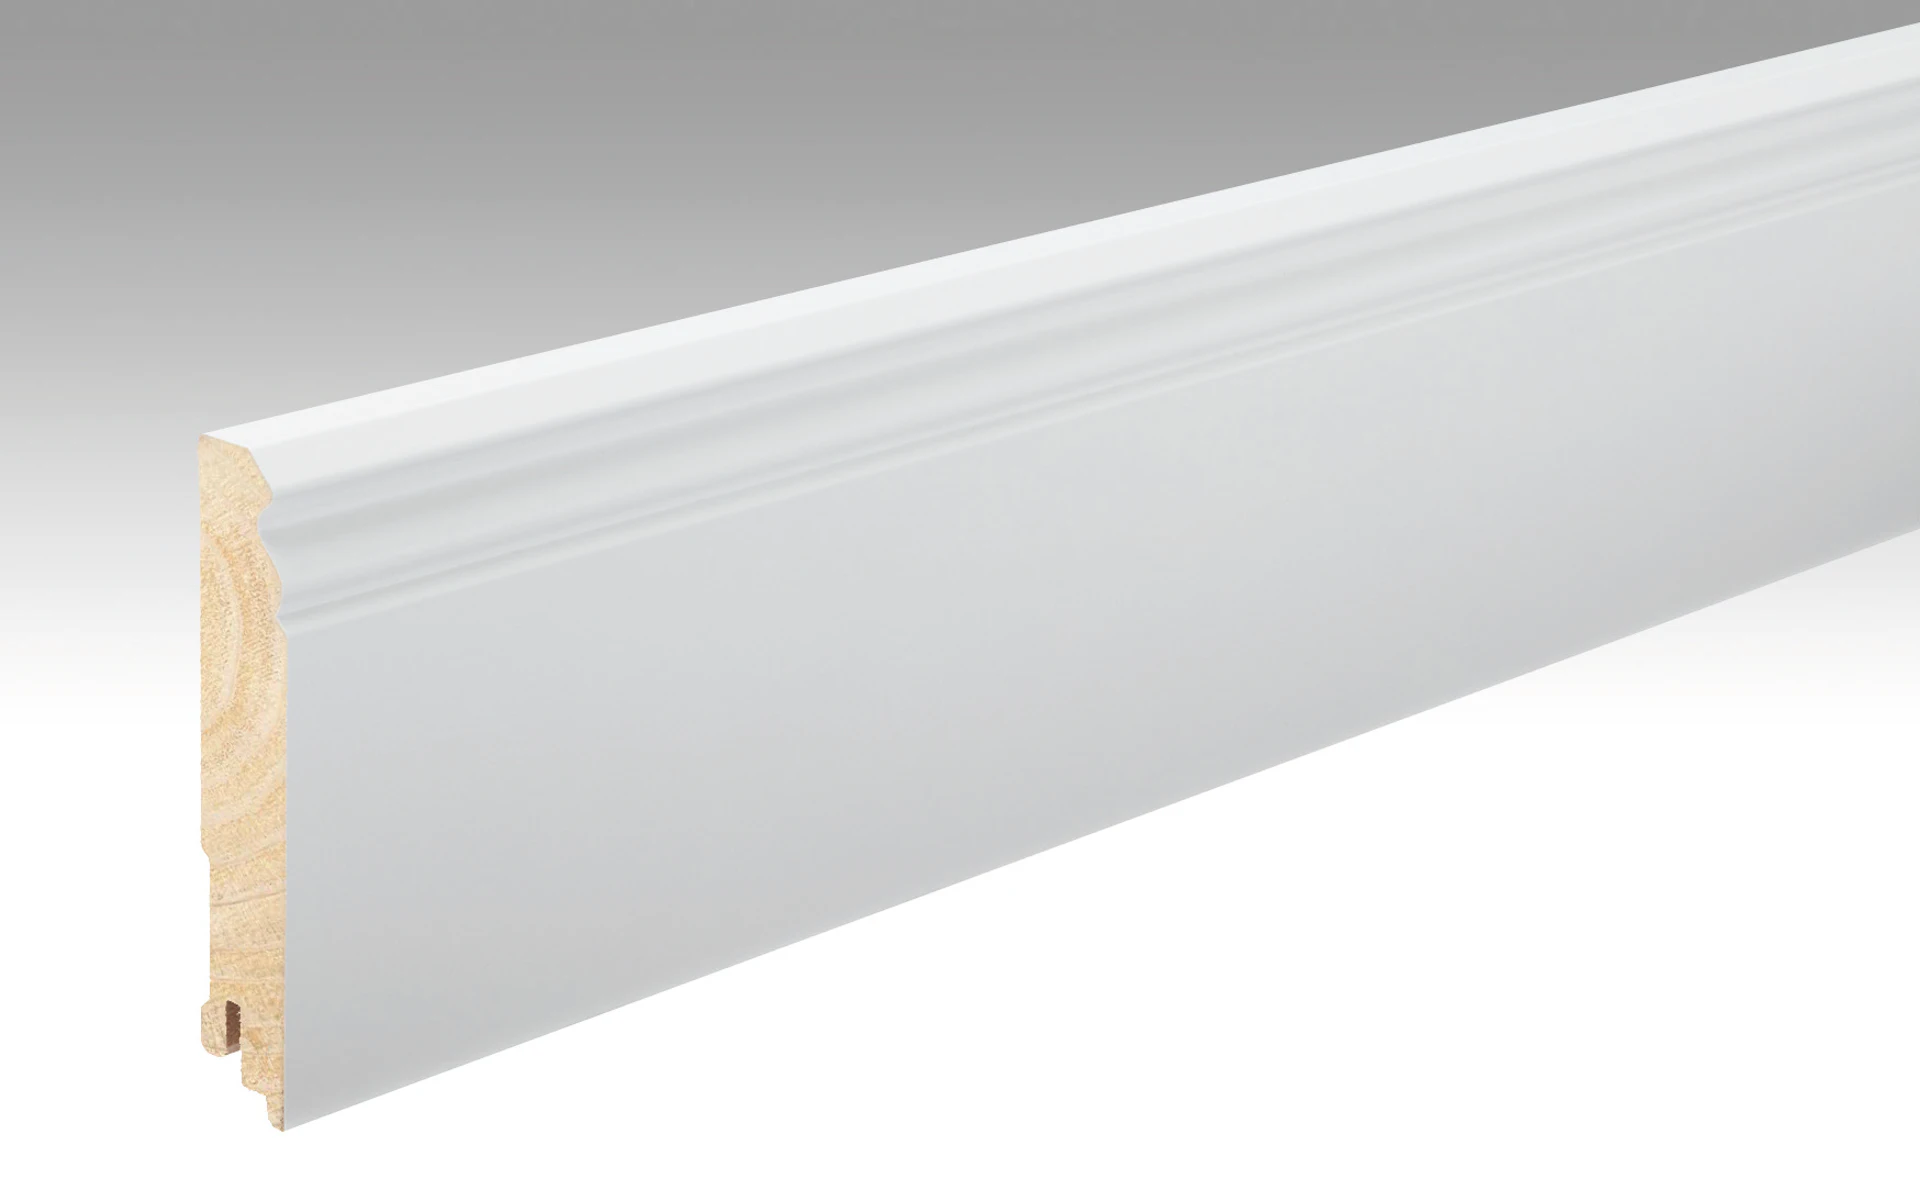 MEISTER Skirtings White DF (RAL 9016) 2266 - 2380 x 100 x 18 mm (200021-2380-02266)